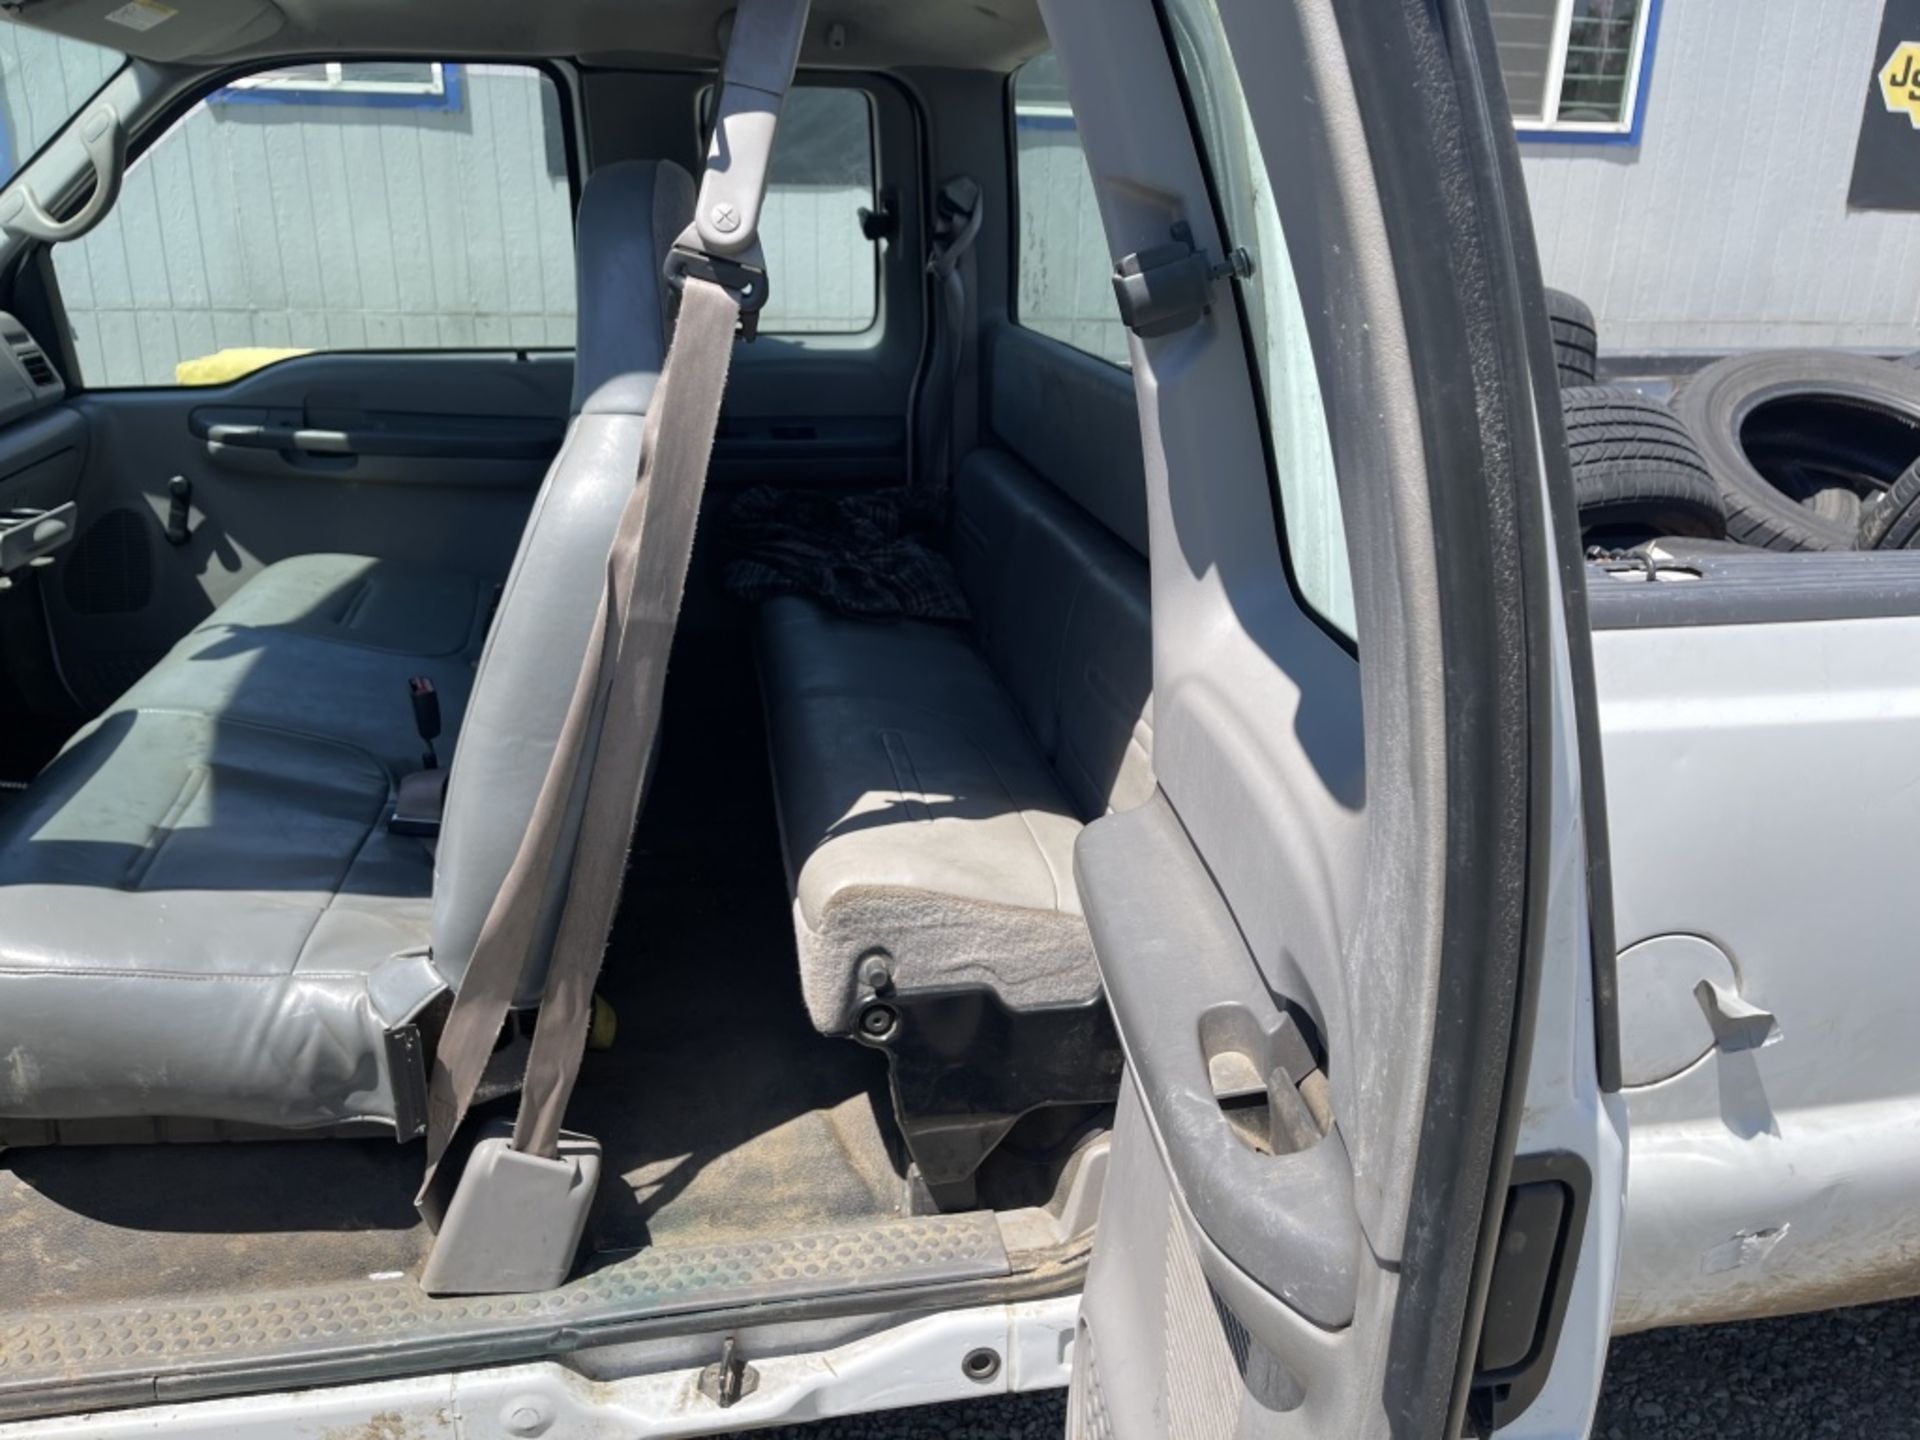 1999 Ford F250 SD Extra Cab Pickup - Image 13 of 24